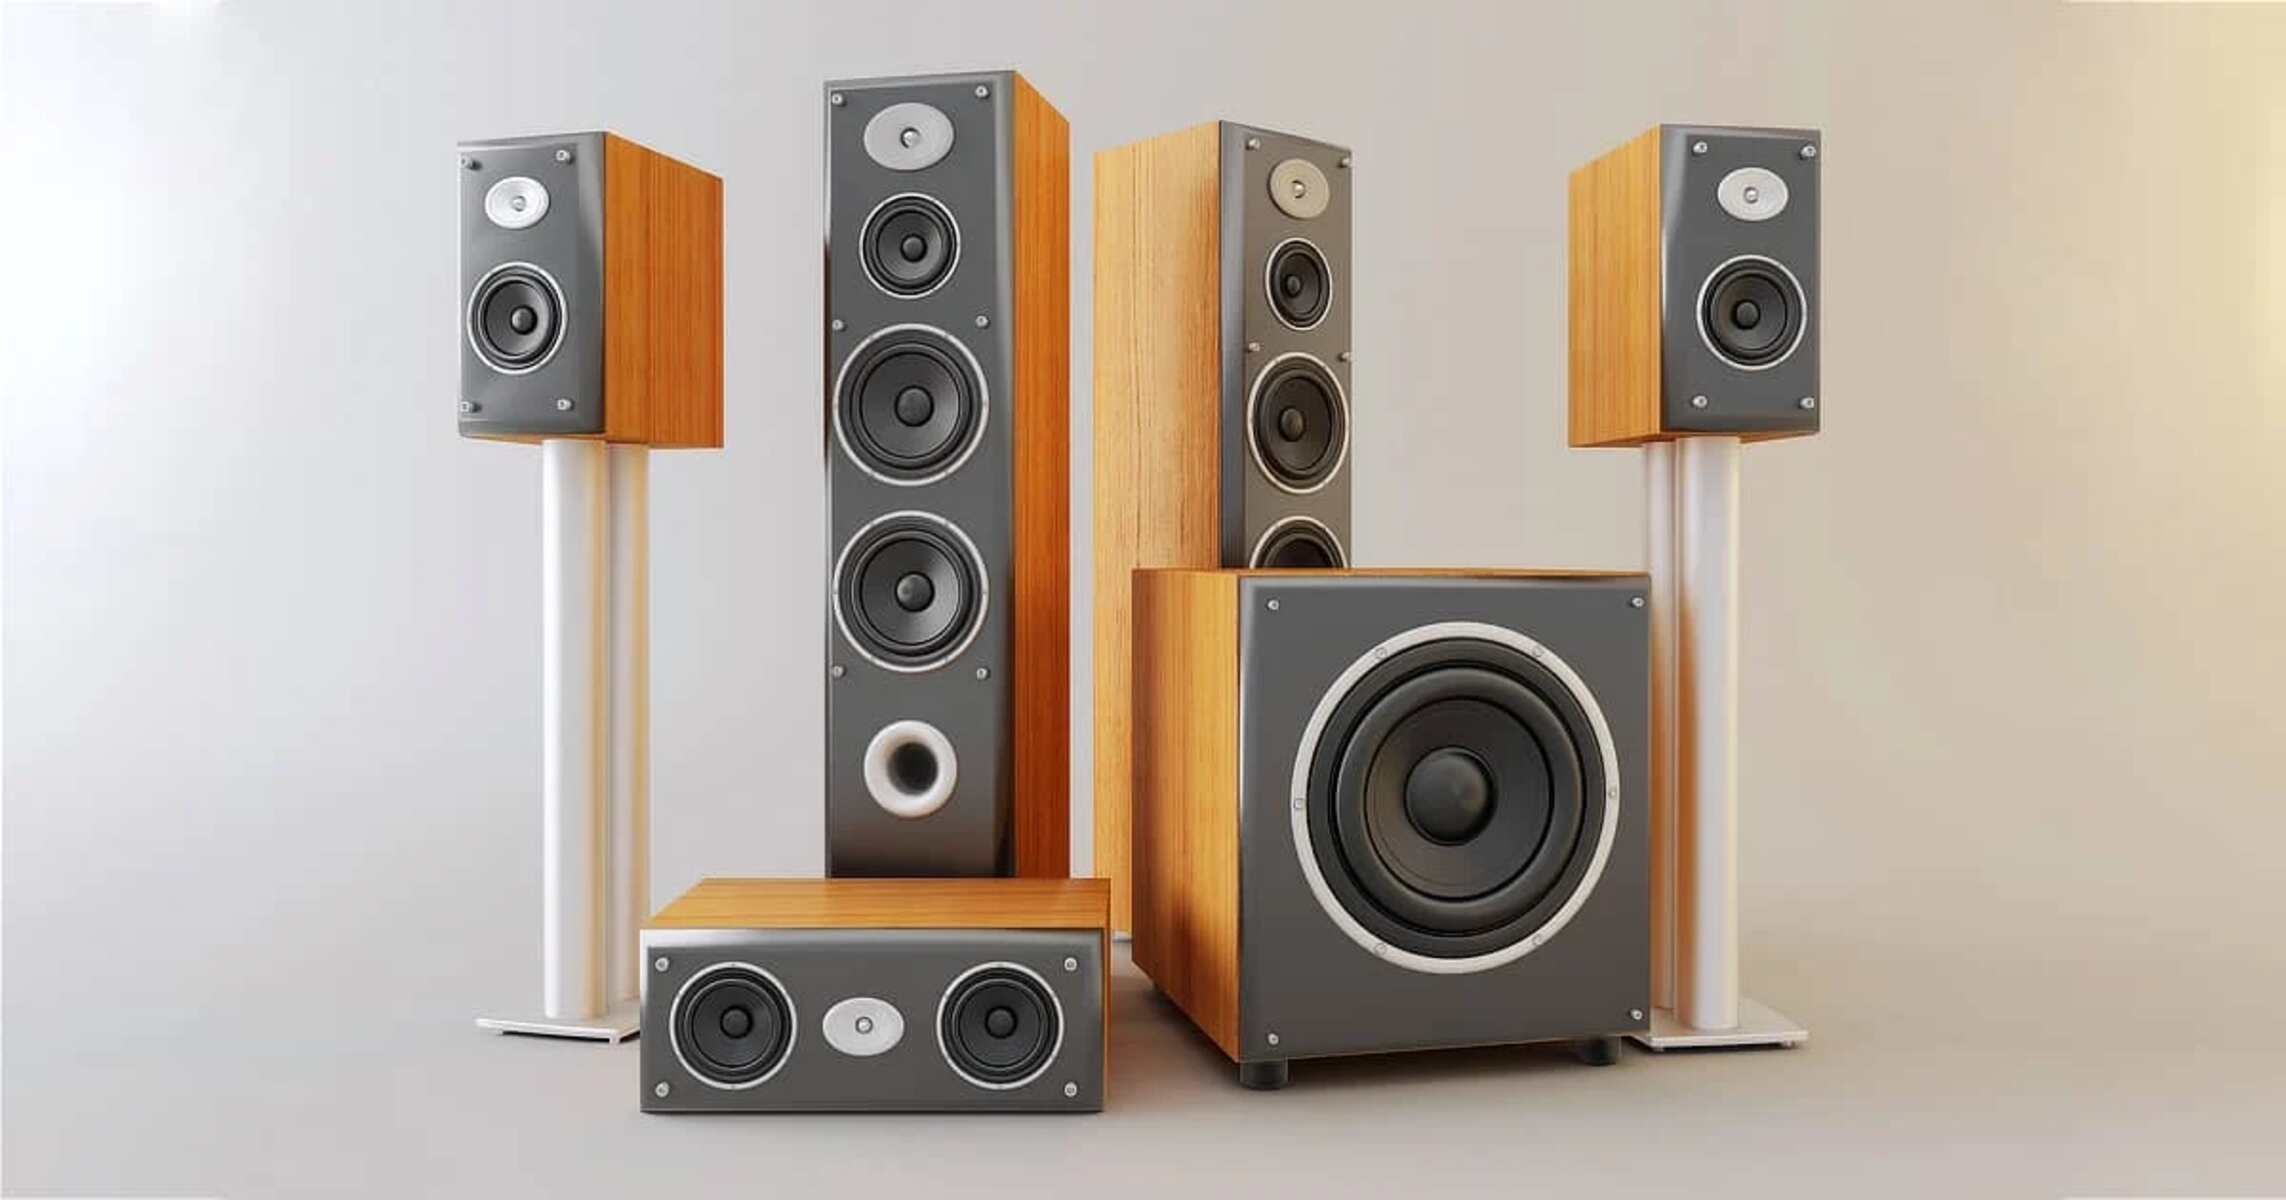 How To Make A Surround Sound System With Multiple Speakers